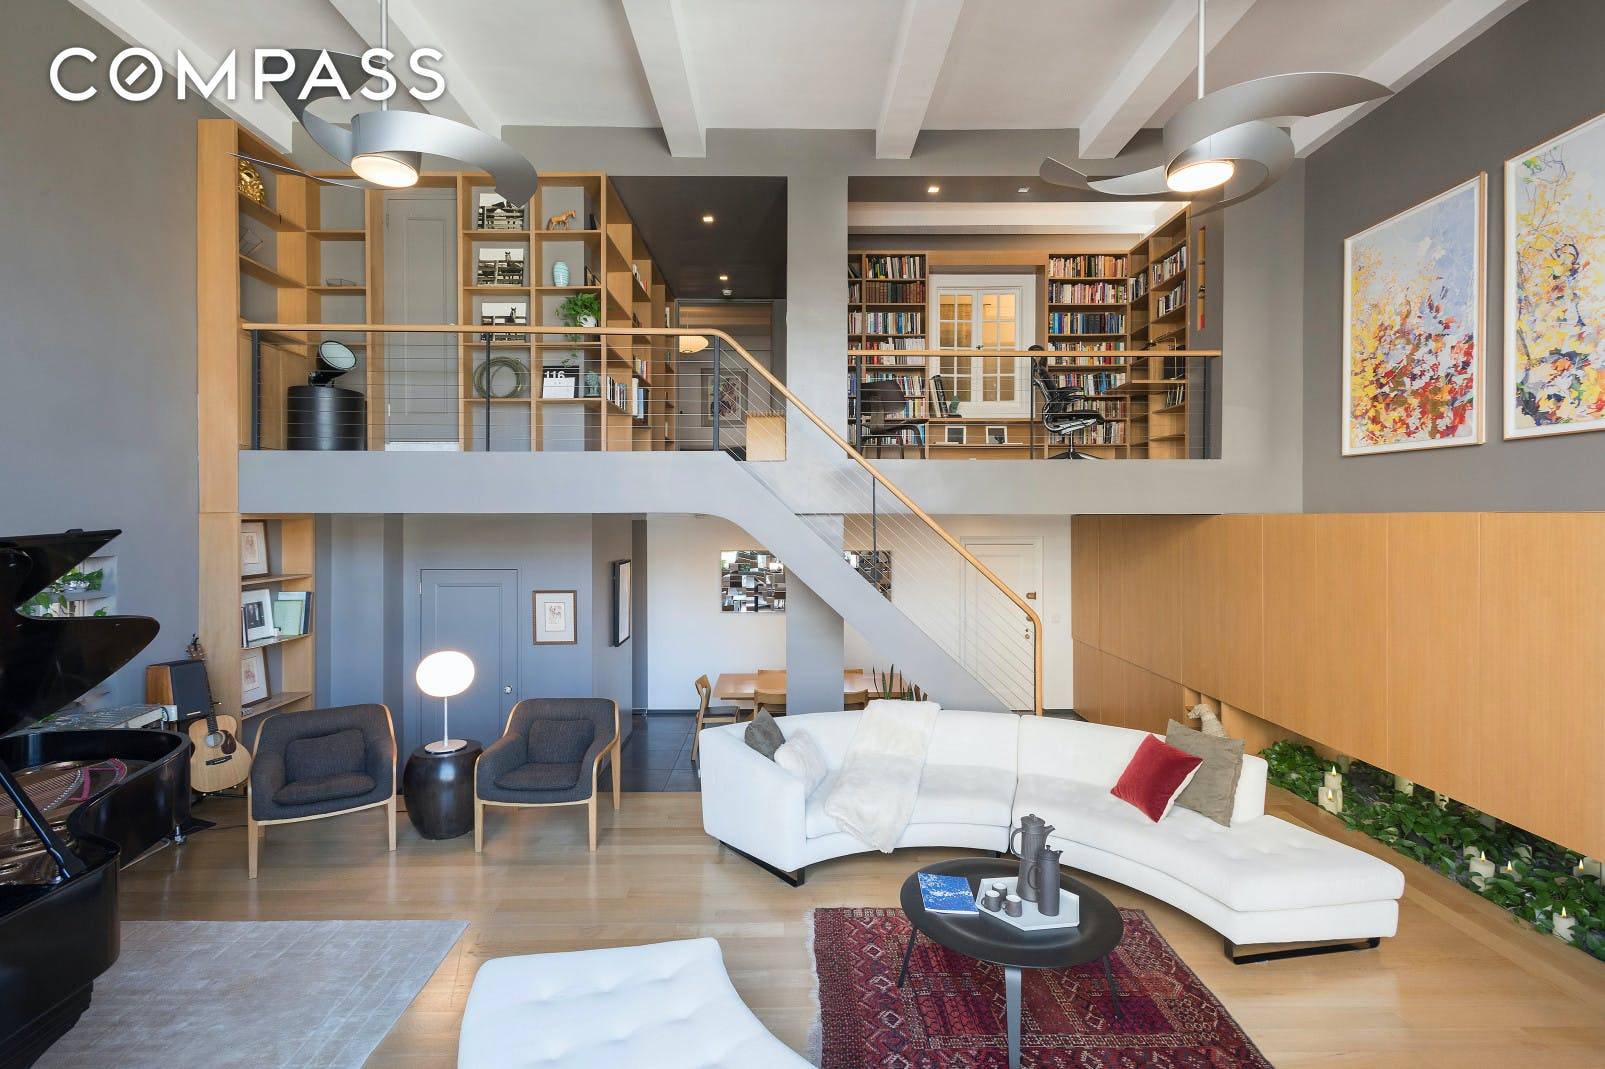 Uptown meets Downtown in this artfully designed 2 Bedroom loft like space in the legendary Hotel des Artistes.